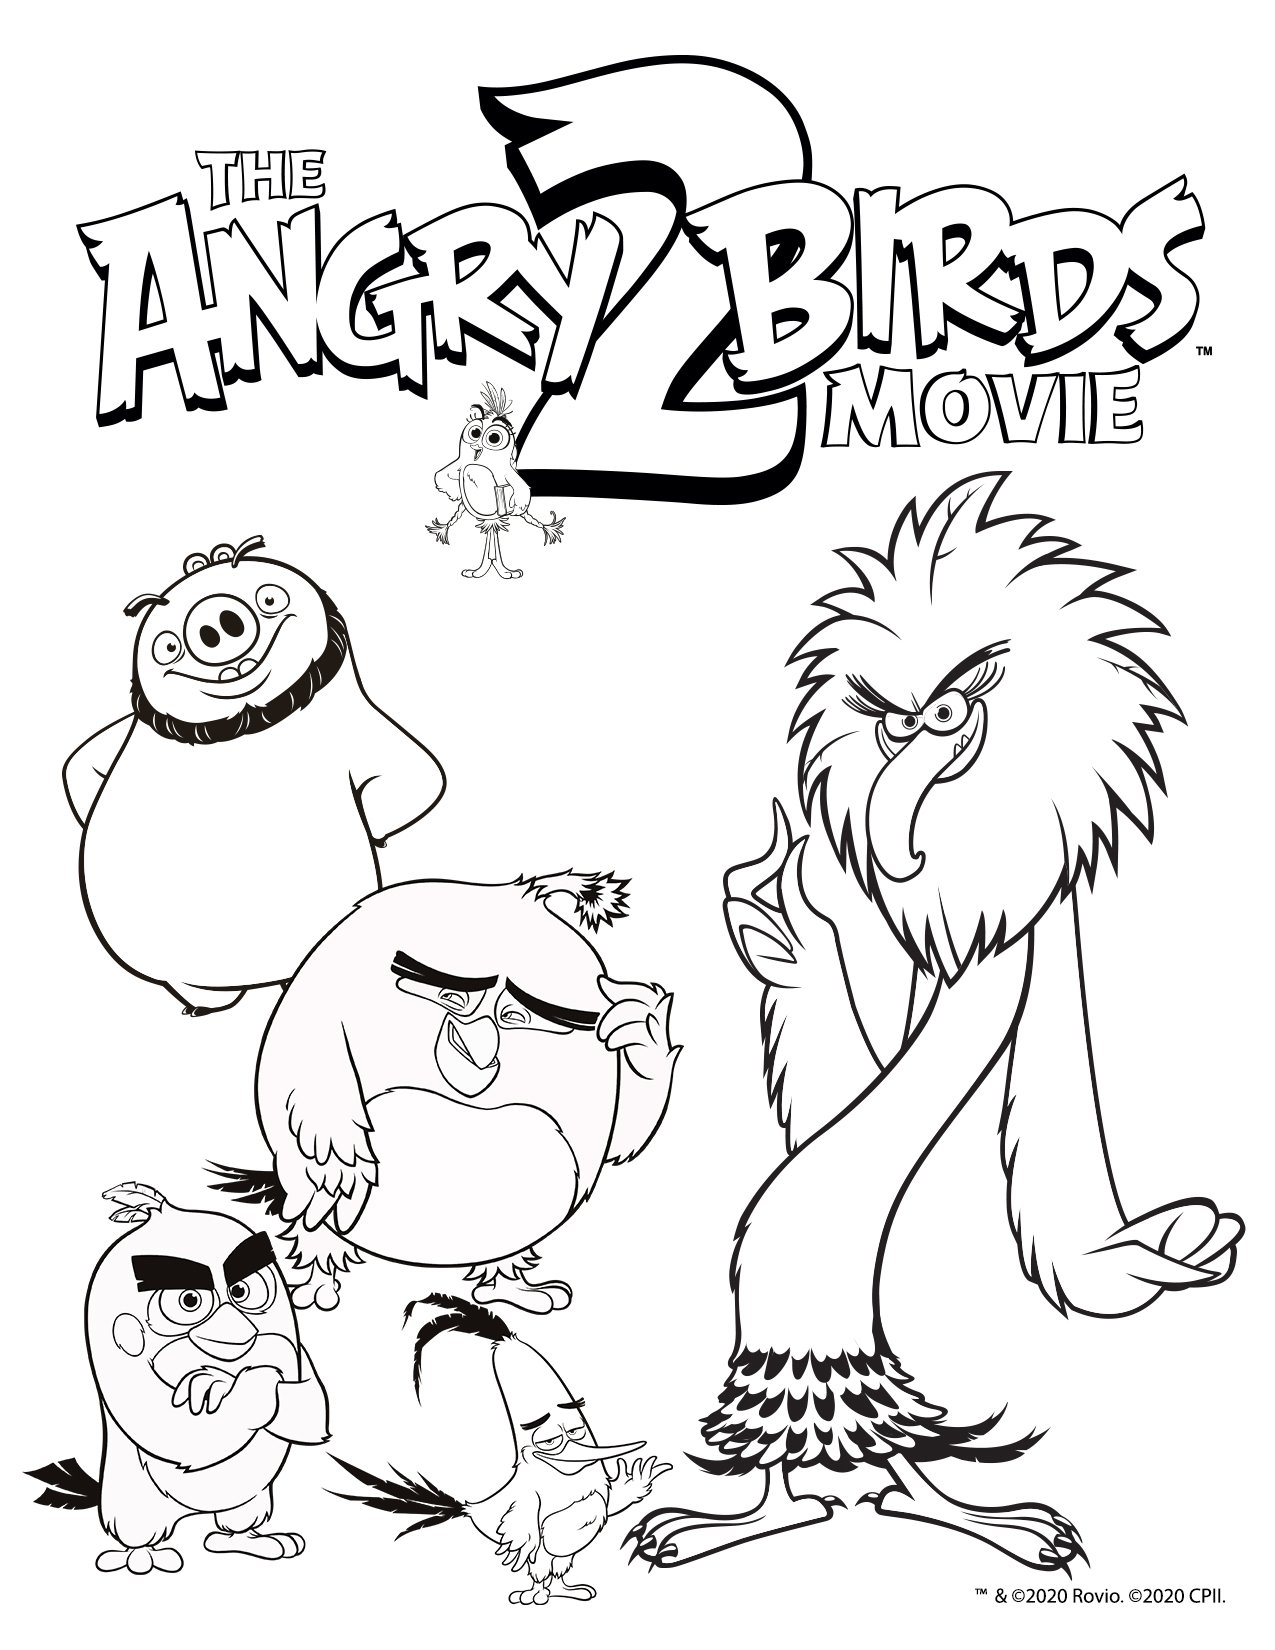 For Kids Movie Coloring Sheets Cinemark Movie News